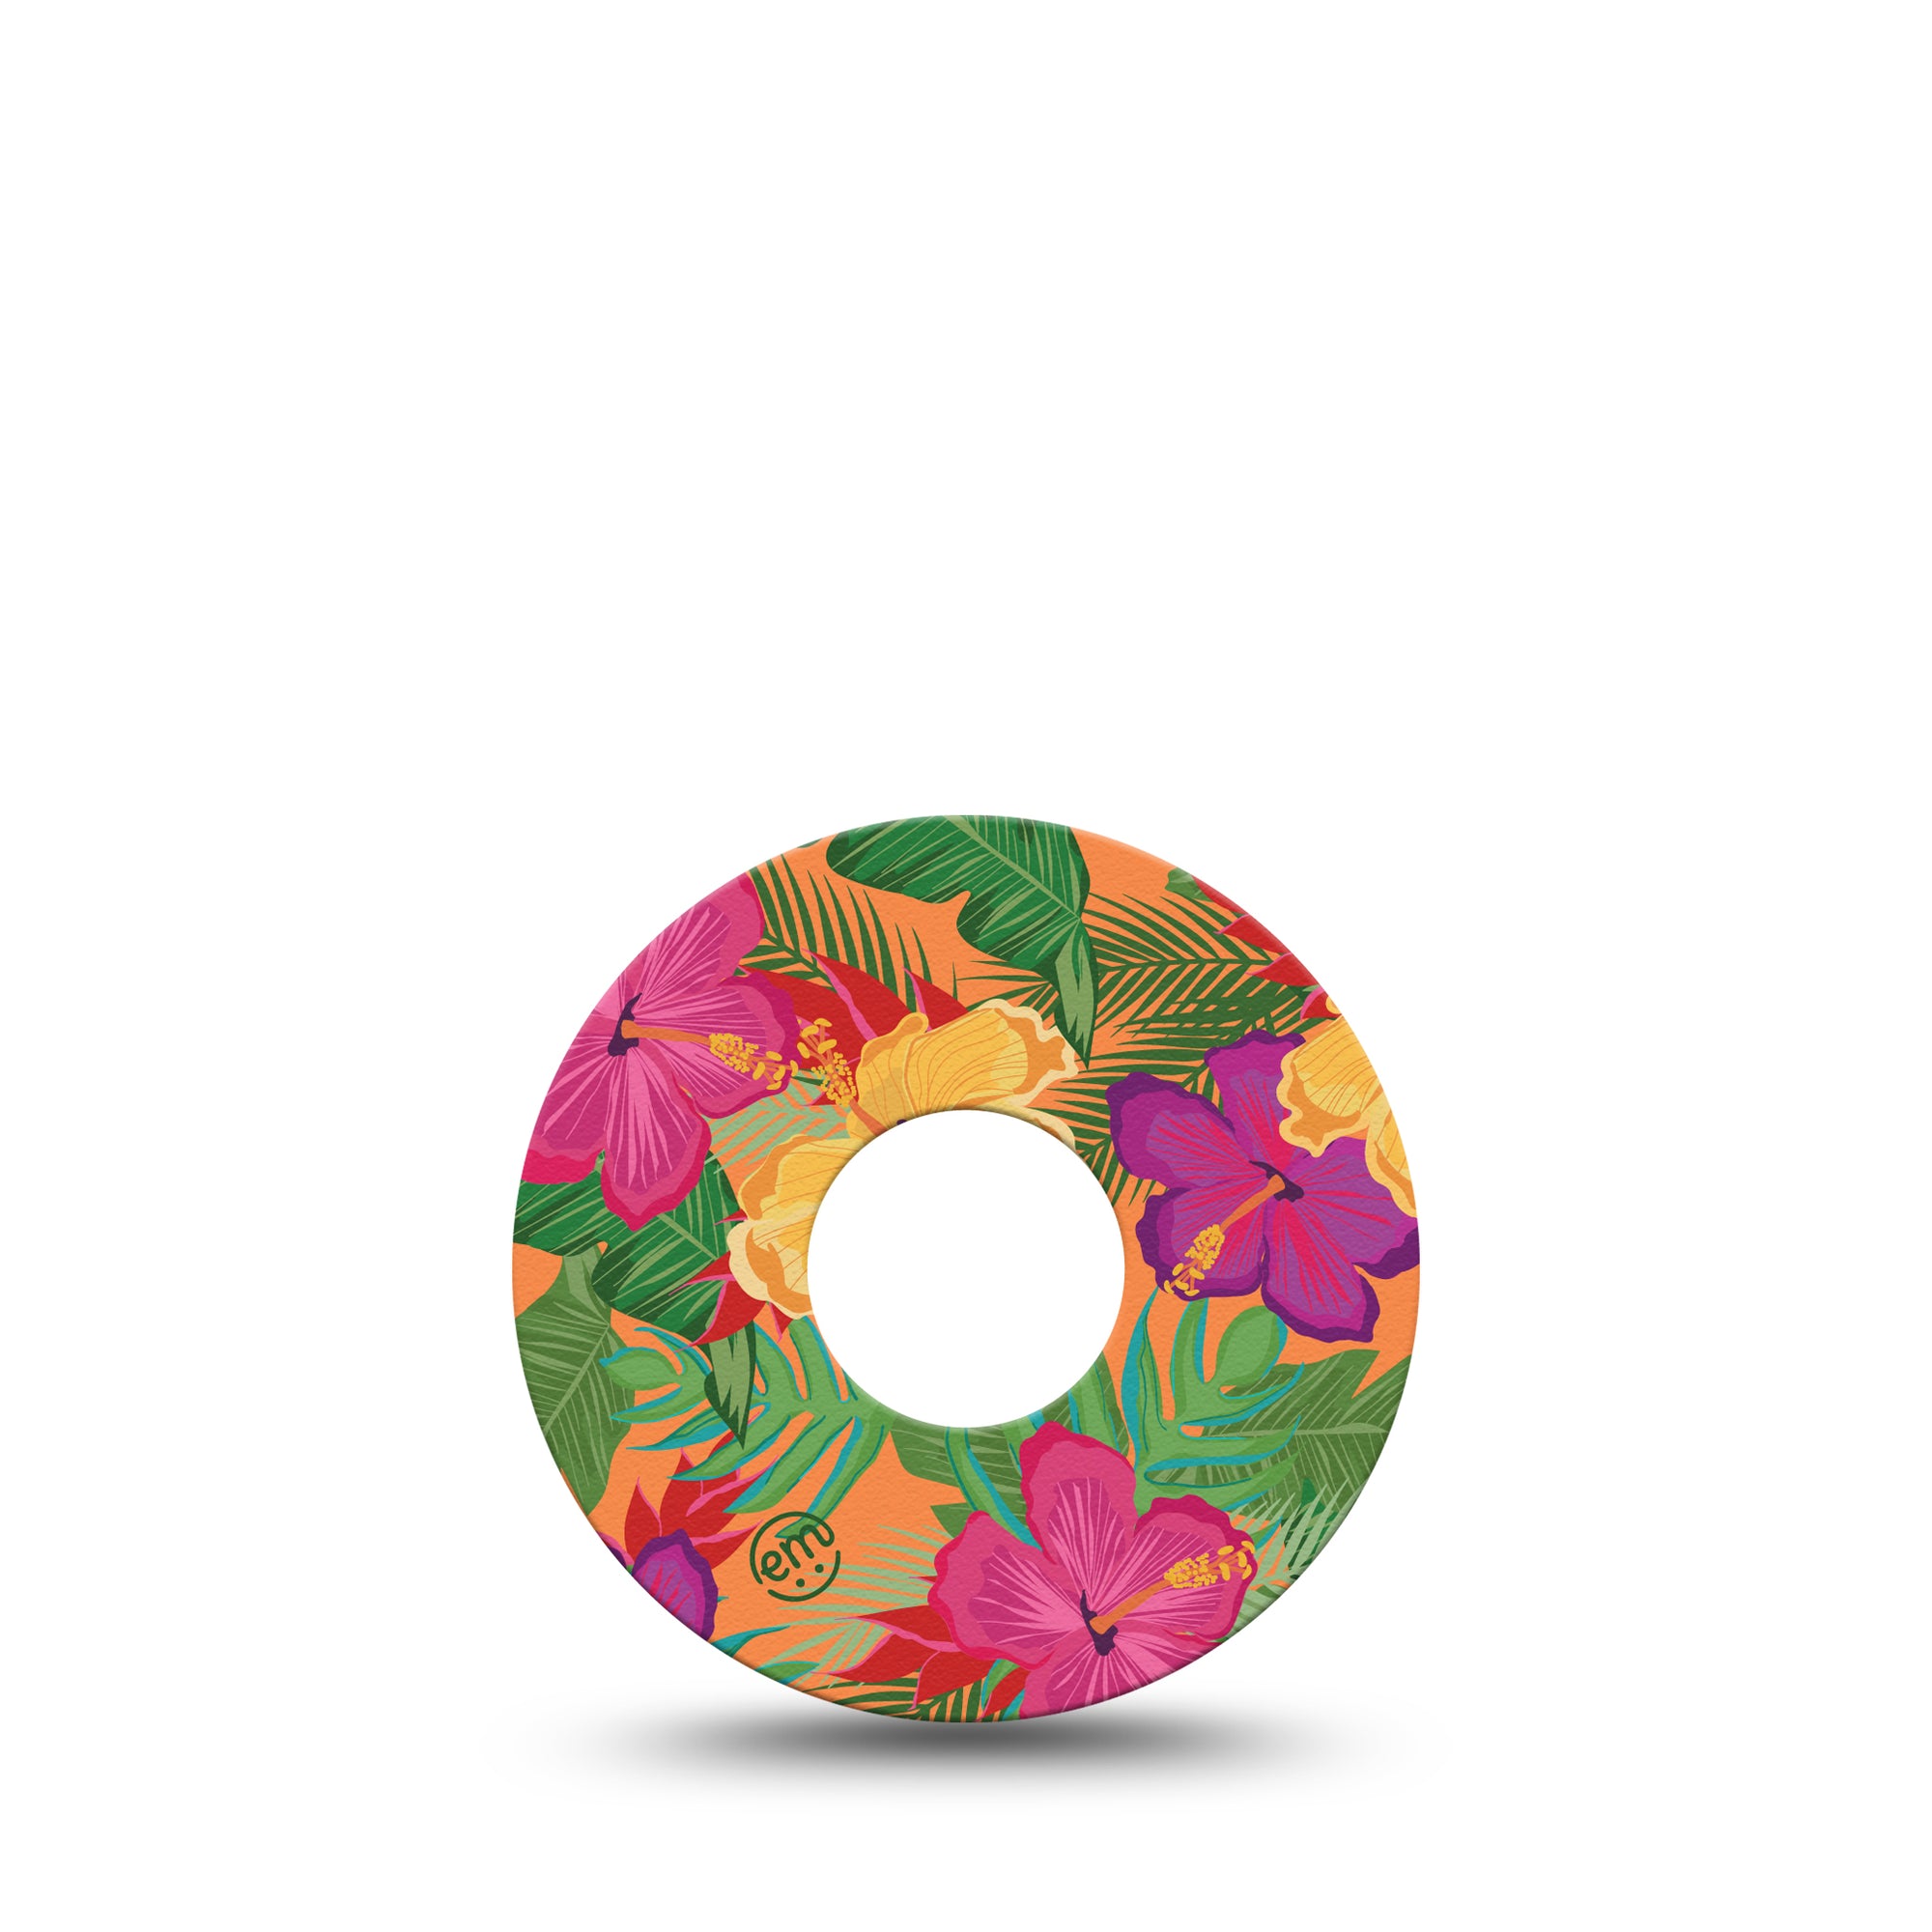 Bright Hibiscus Libre 3 Tape, Single ,Tropical Floral Themed, Adhesive Patch Design